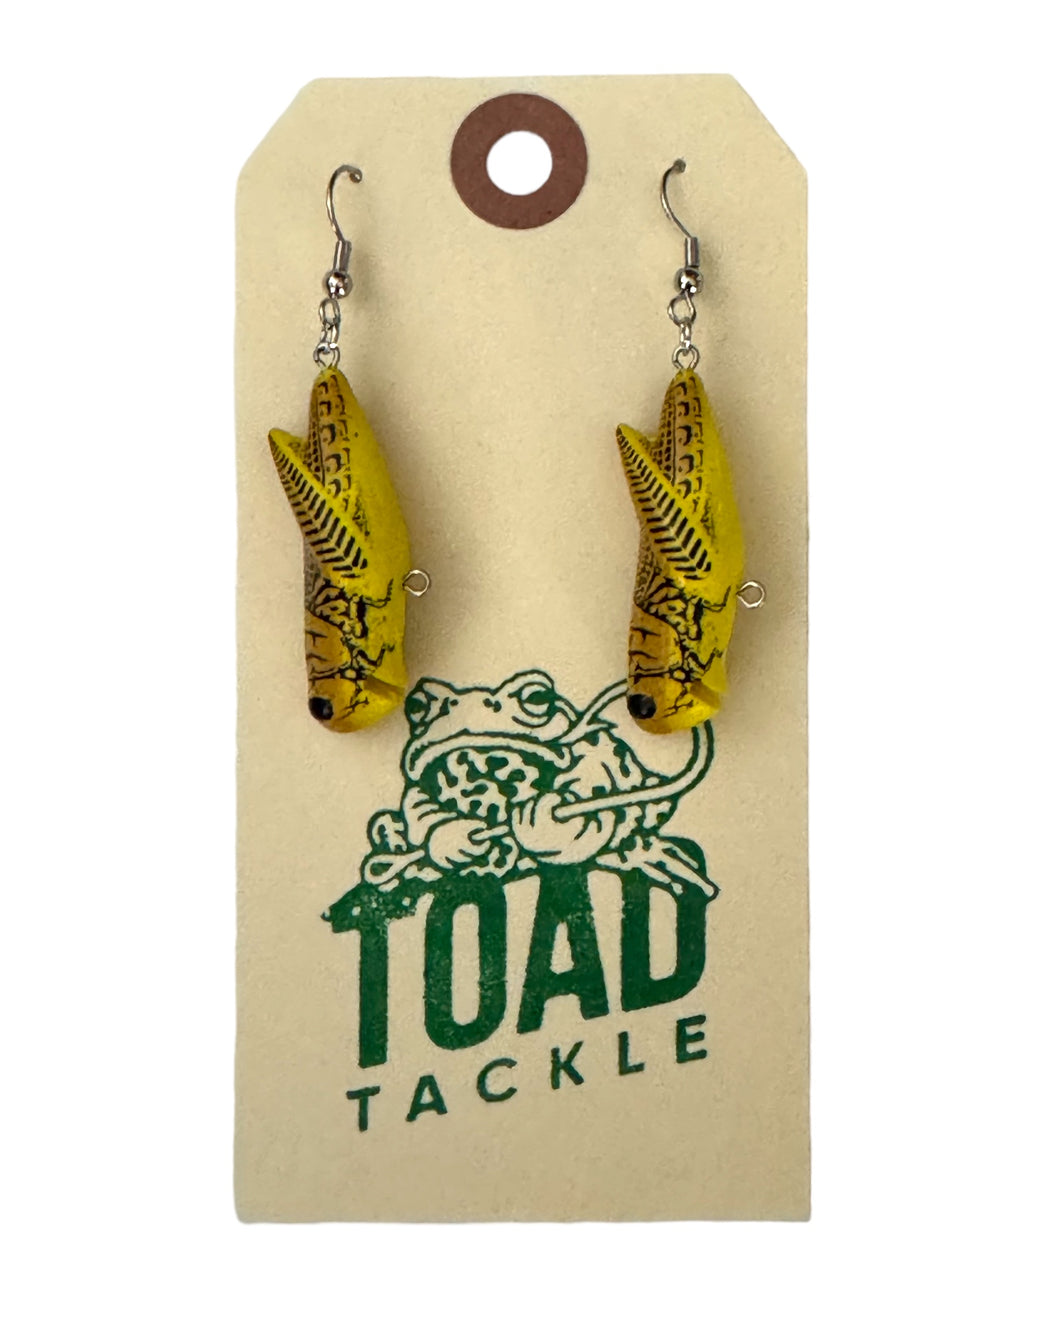 REBEL LURES YELLOW GRASSHOPPER FISHING LURE EARRINGS – Toad Tackle